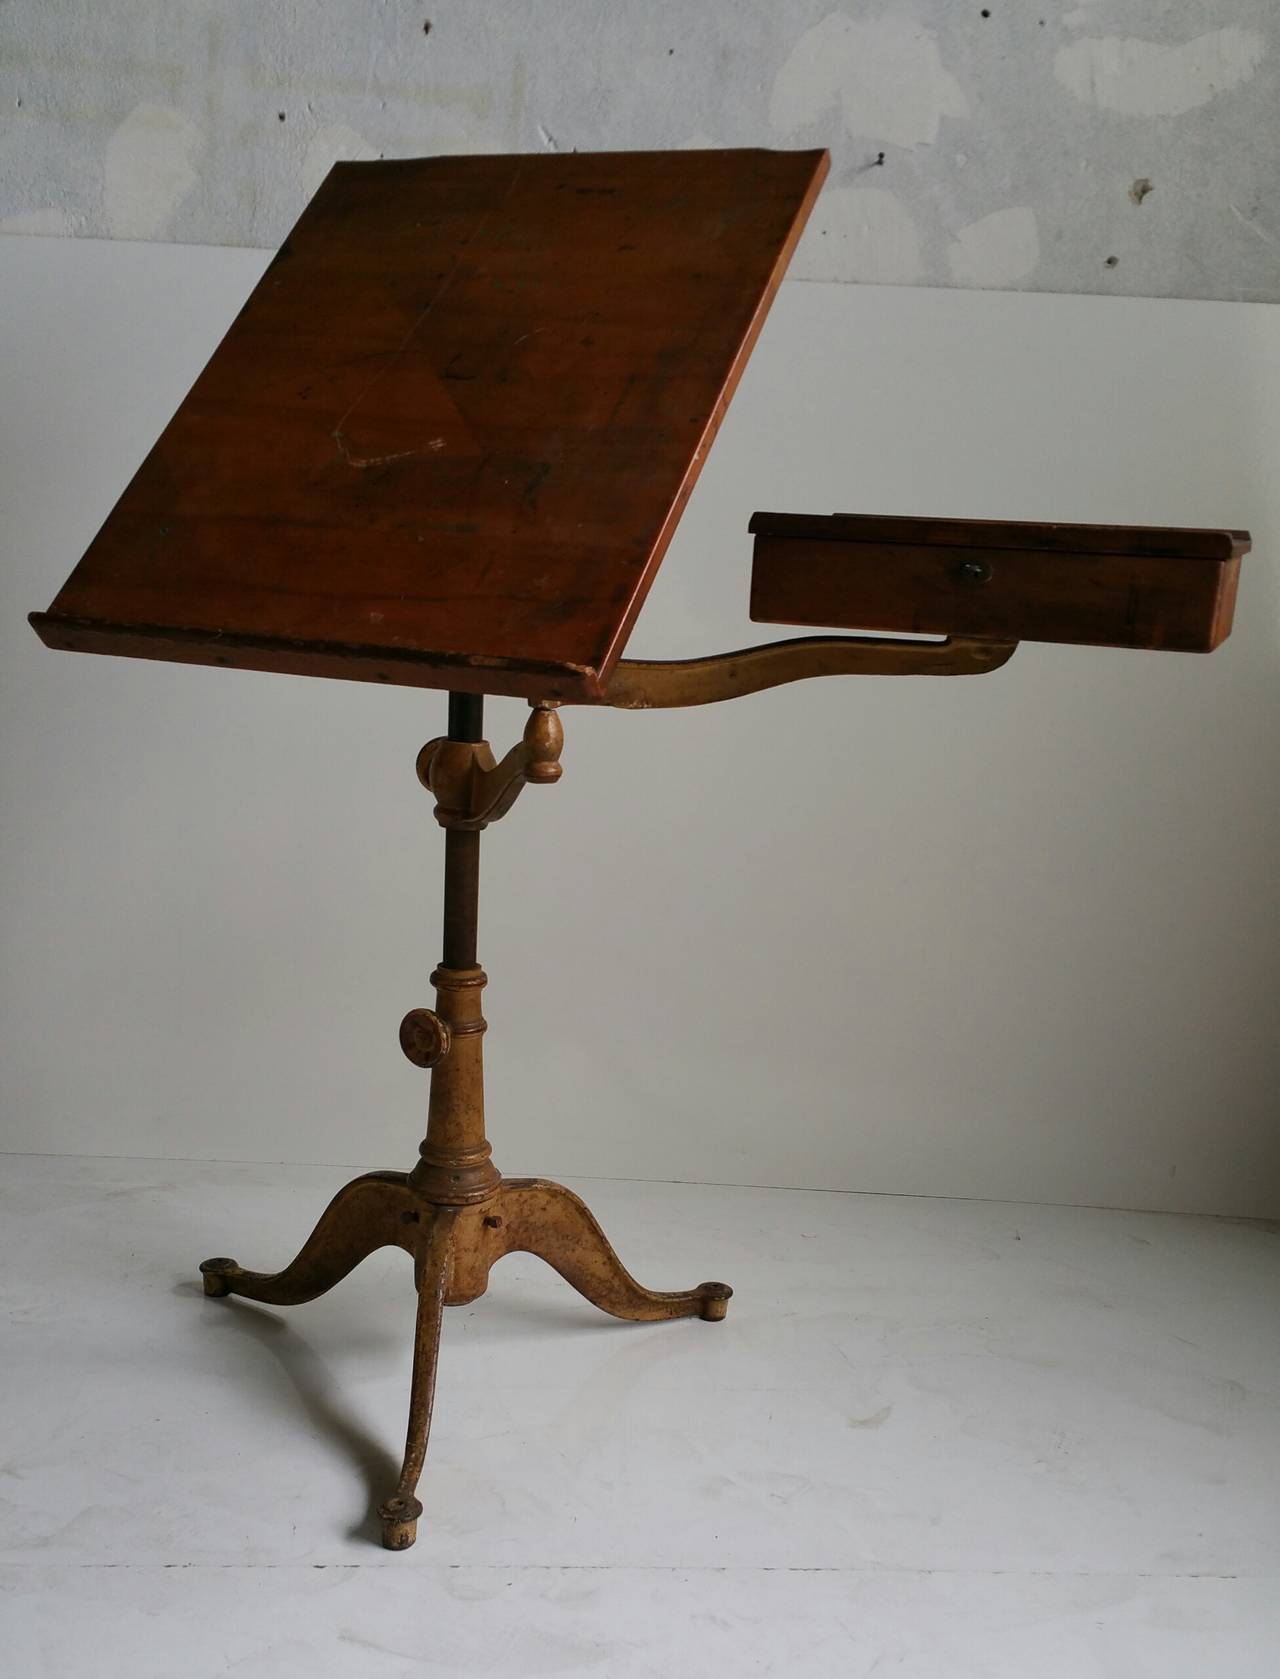 Iron Rare 19th Century Drafting Table with Swing-Out Drawer